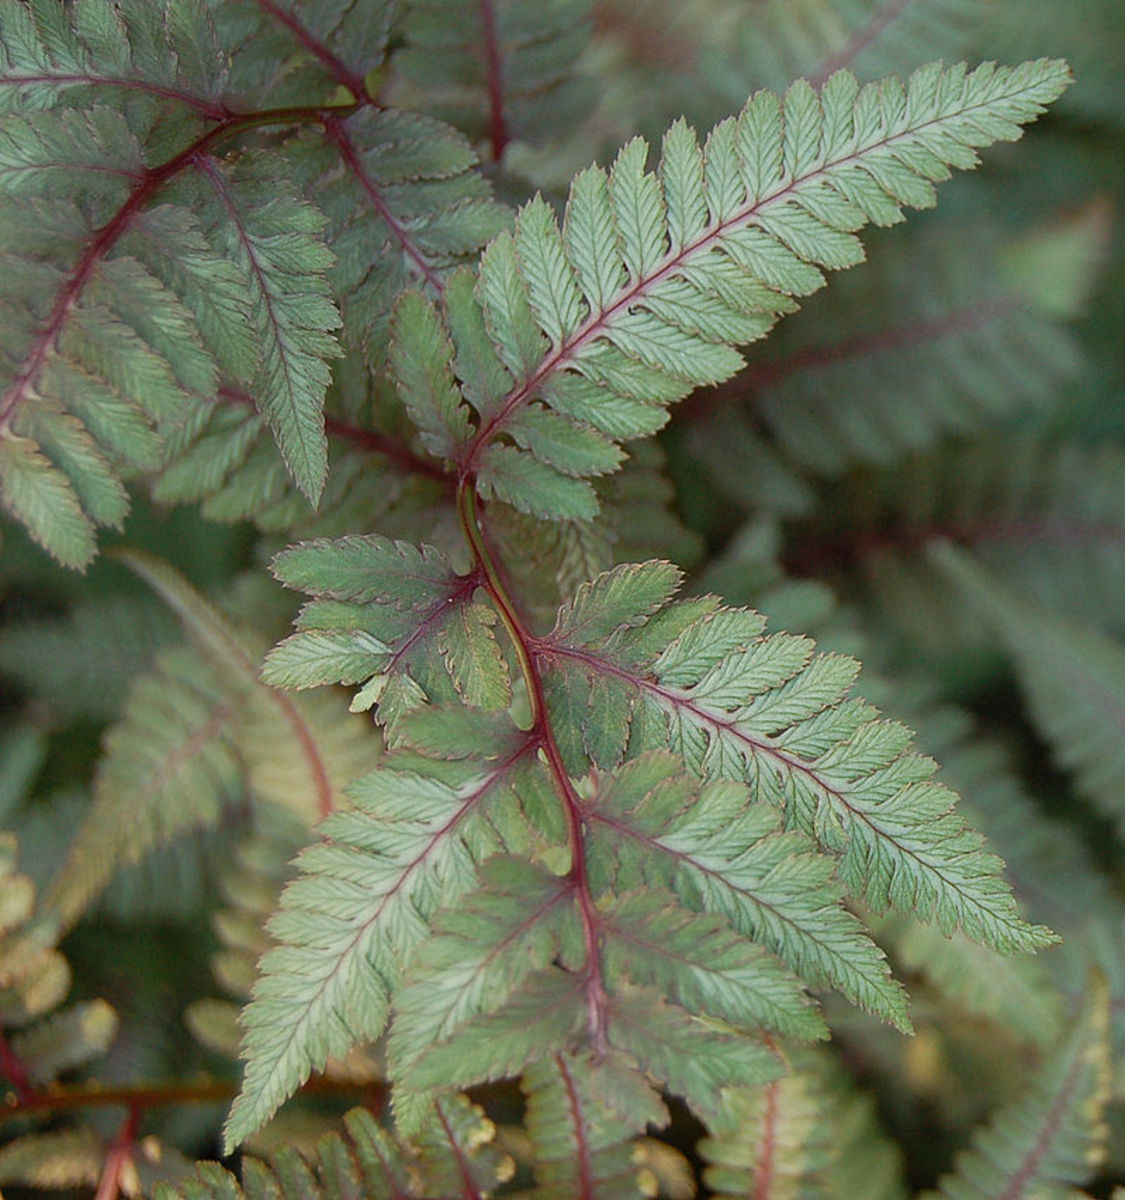 The cultivar Ursula's Red.  Note its bright red midrib.